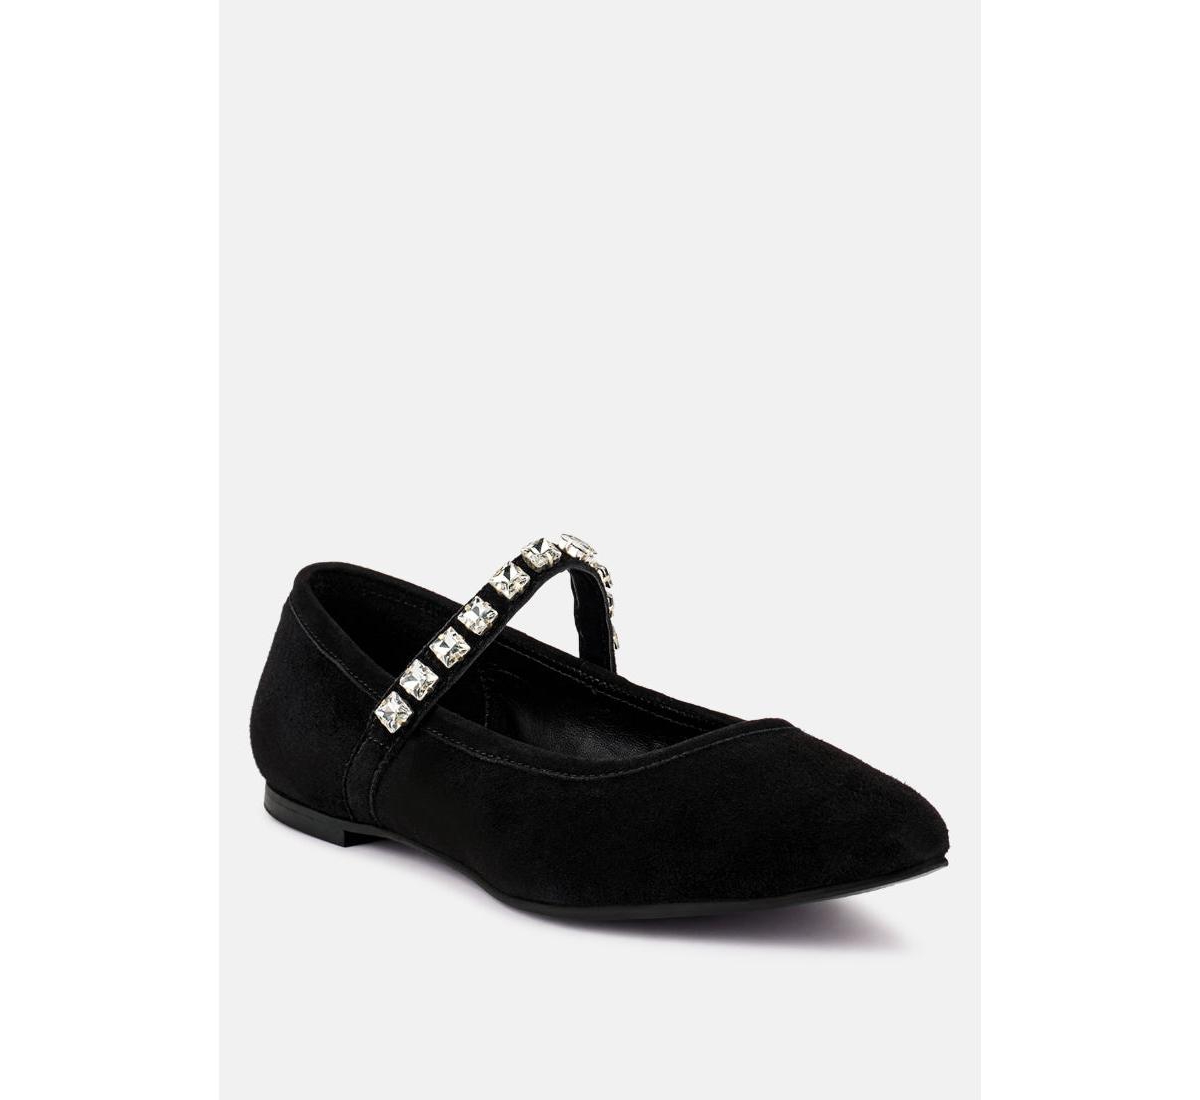 Assisi Womens Fine Suede Mary Jane Ballet Flats - Black